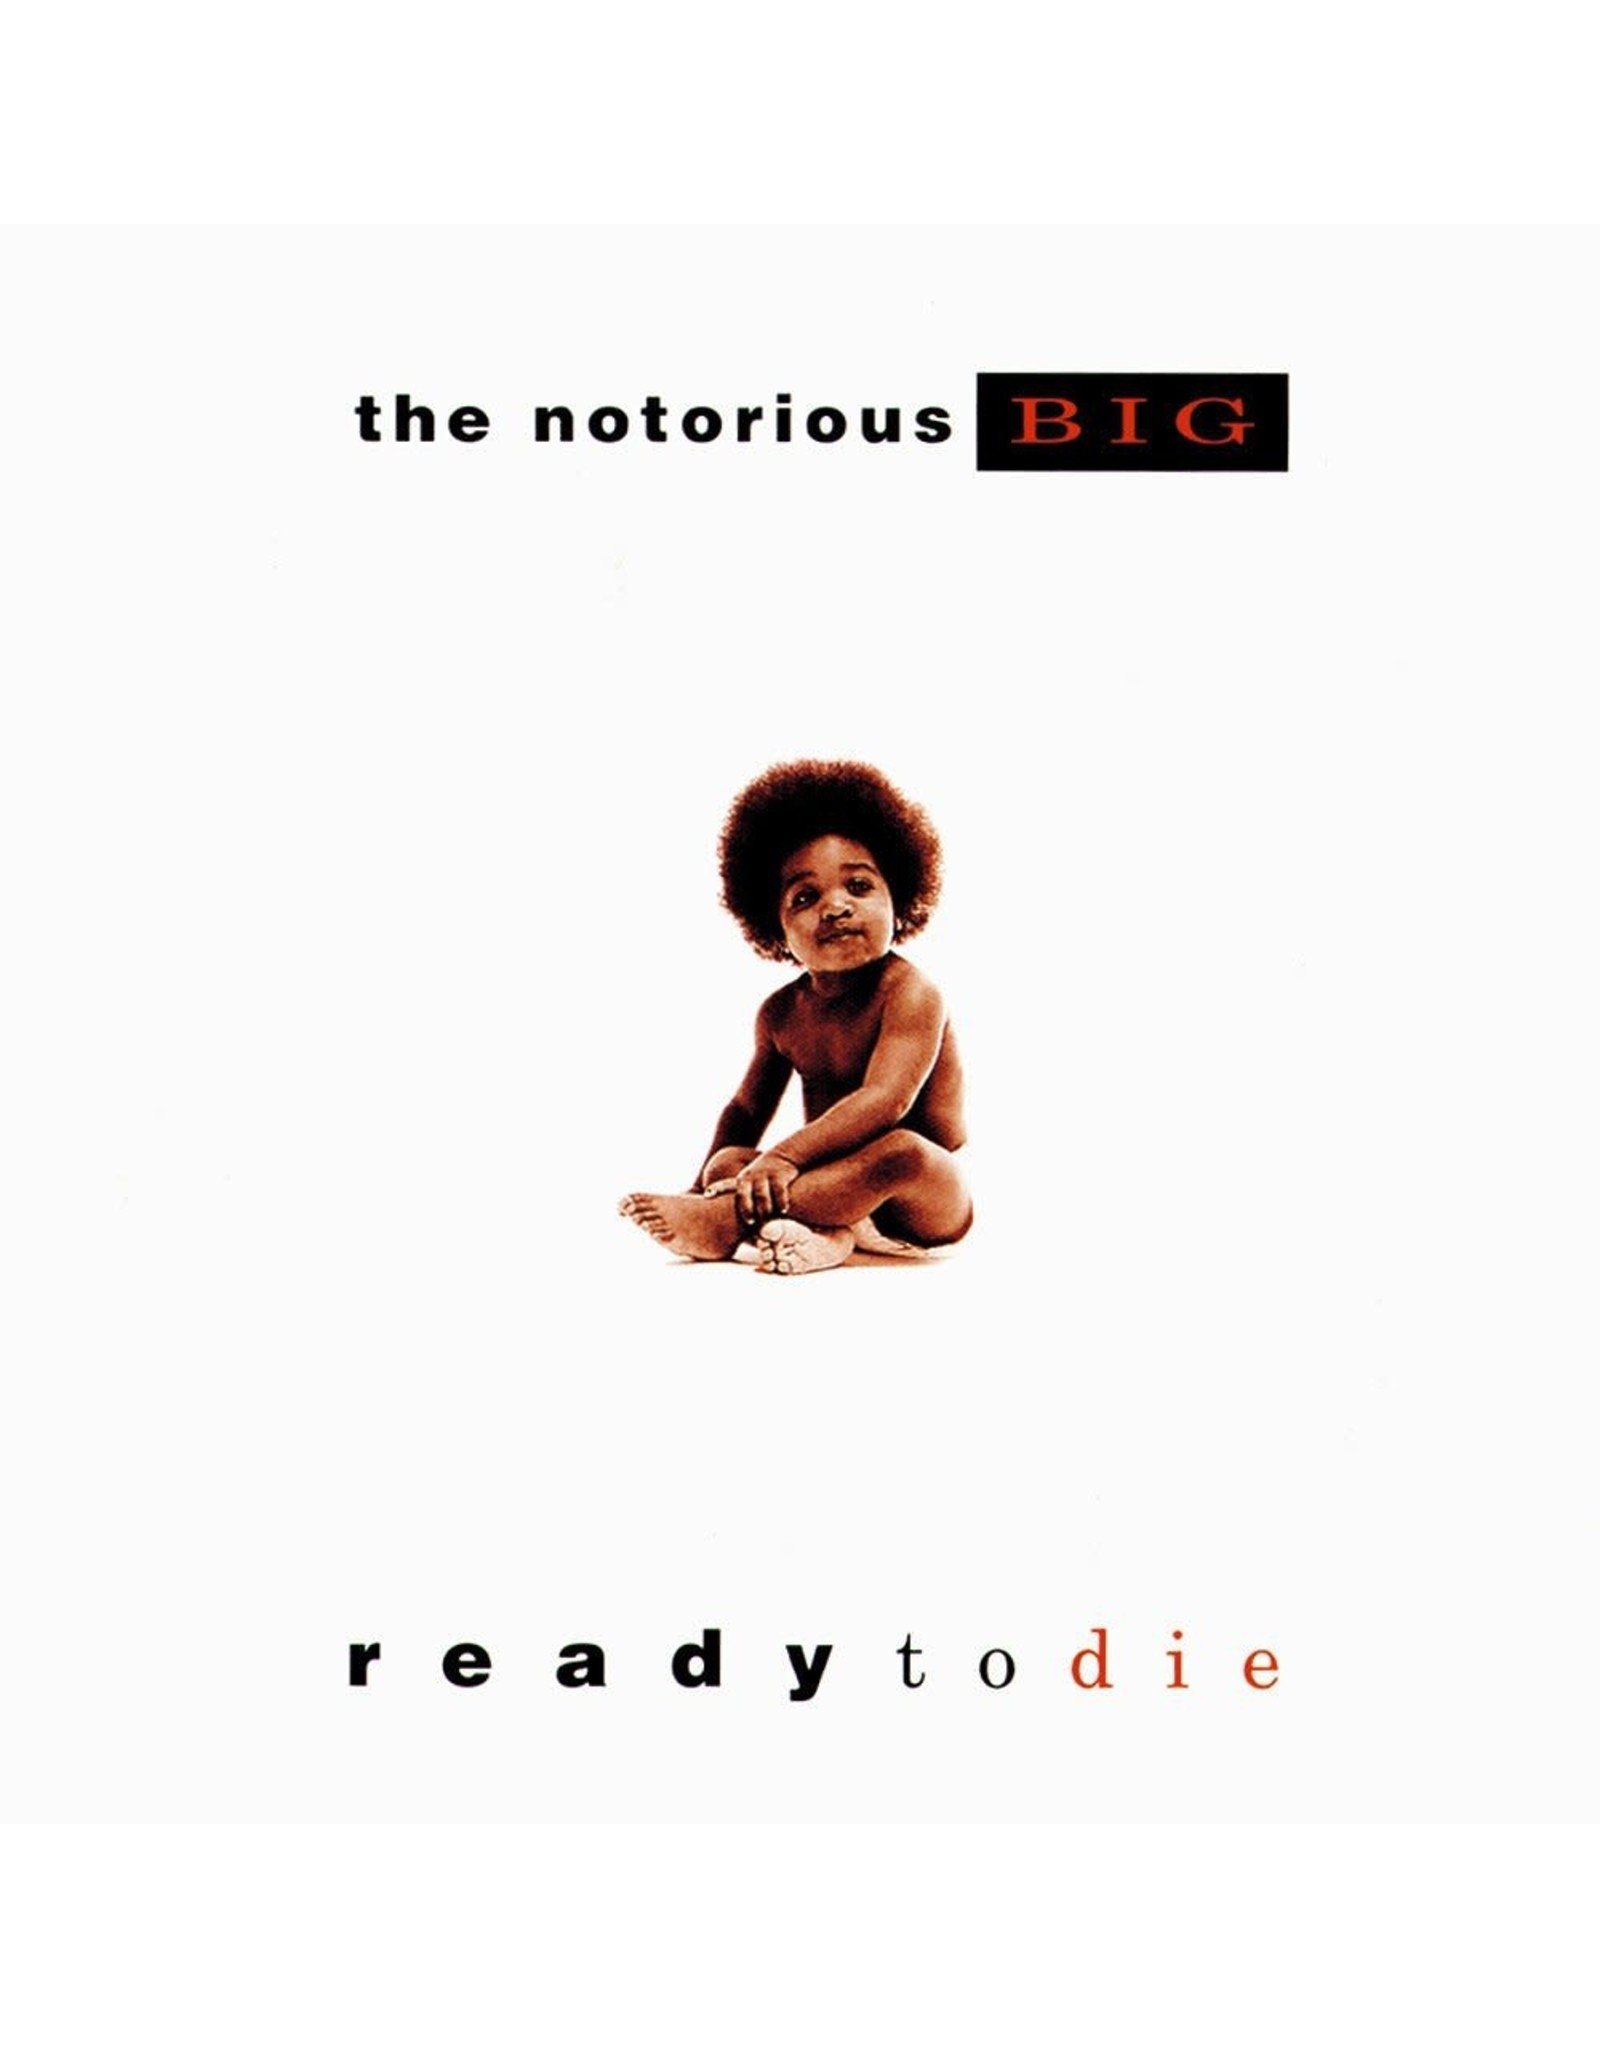 The Notorious B.I.G. - Ready To Die (Original Artwork)